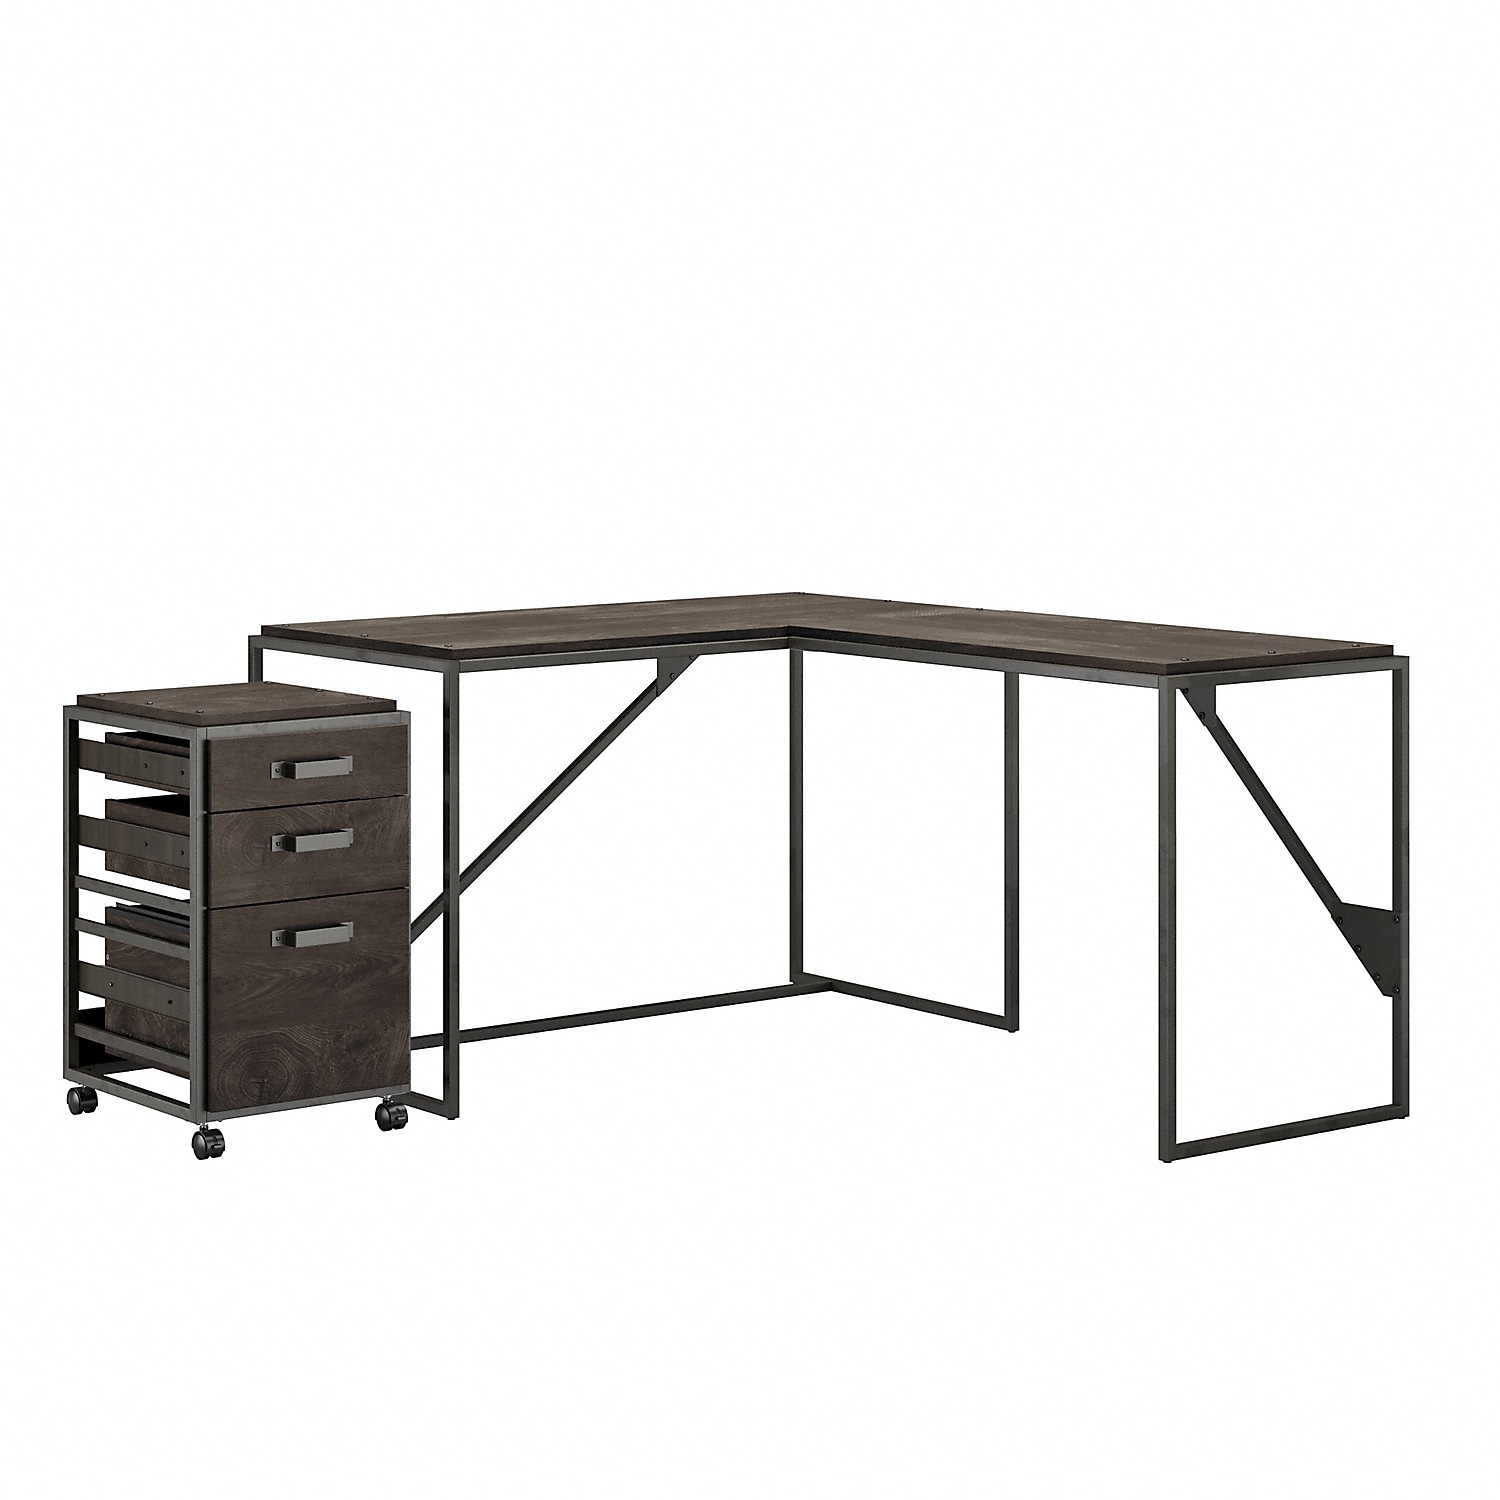 Bush Furniture Refinery 50W L Shaped Industrial Desk with 3 Drawer Mobile File Cabinet - image 1 of 9